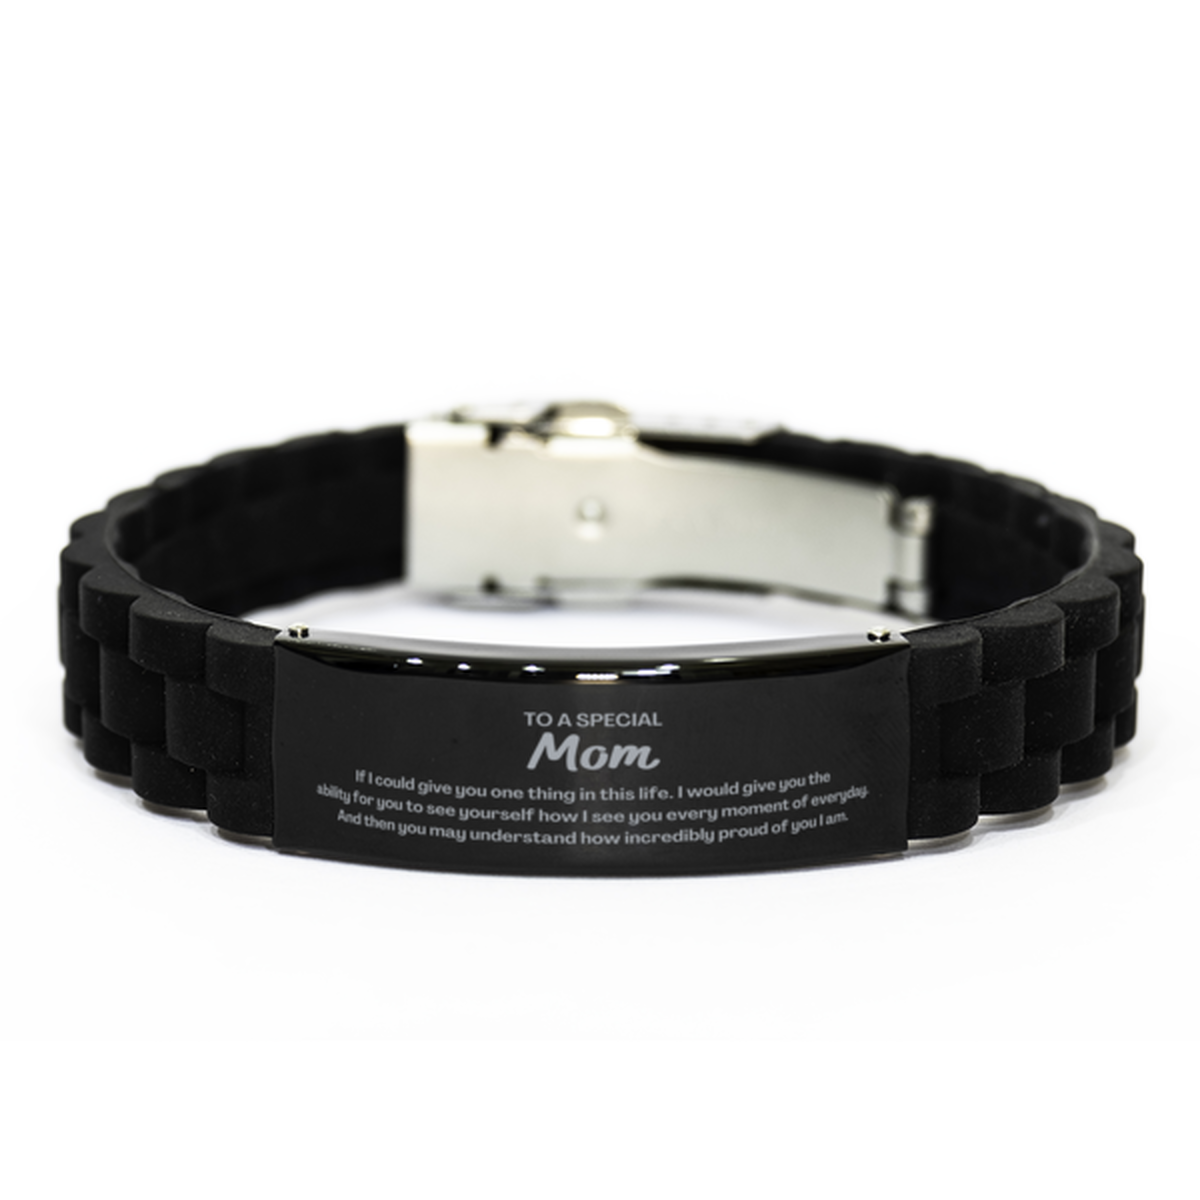 To My Mom Black Glidelock Clasp Bracelet, Gifts For Mom Engraved, Inspirational Gifts for Christmas Birthday, Epic Gifts for Mom To A Special Mom how incredibly proud of you I am